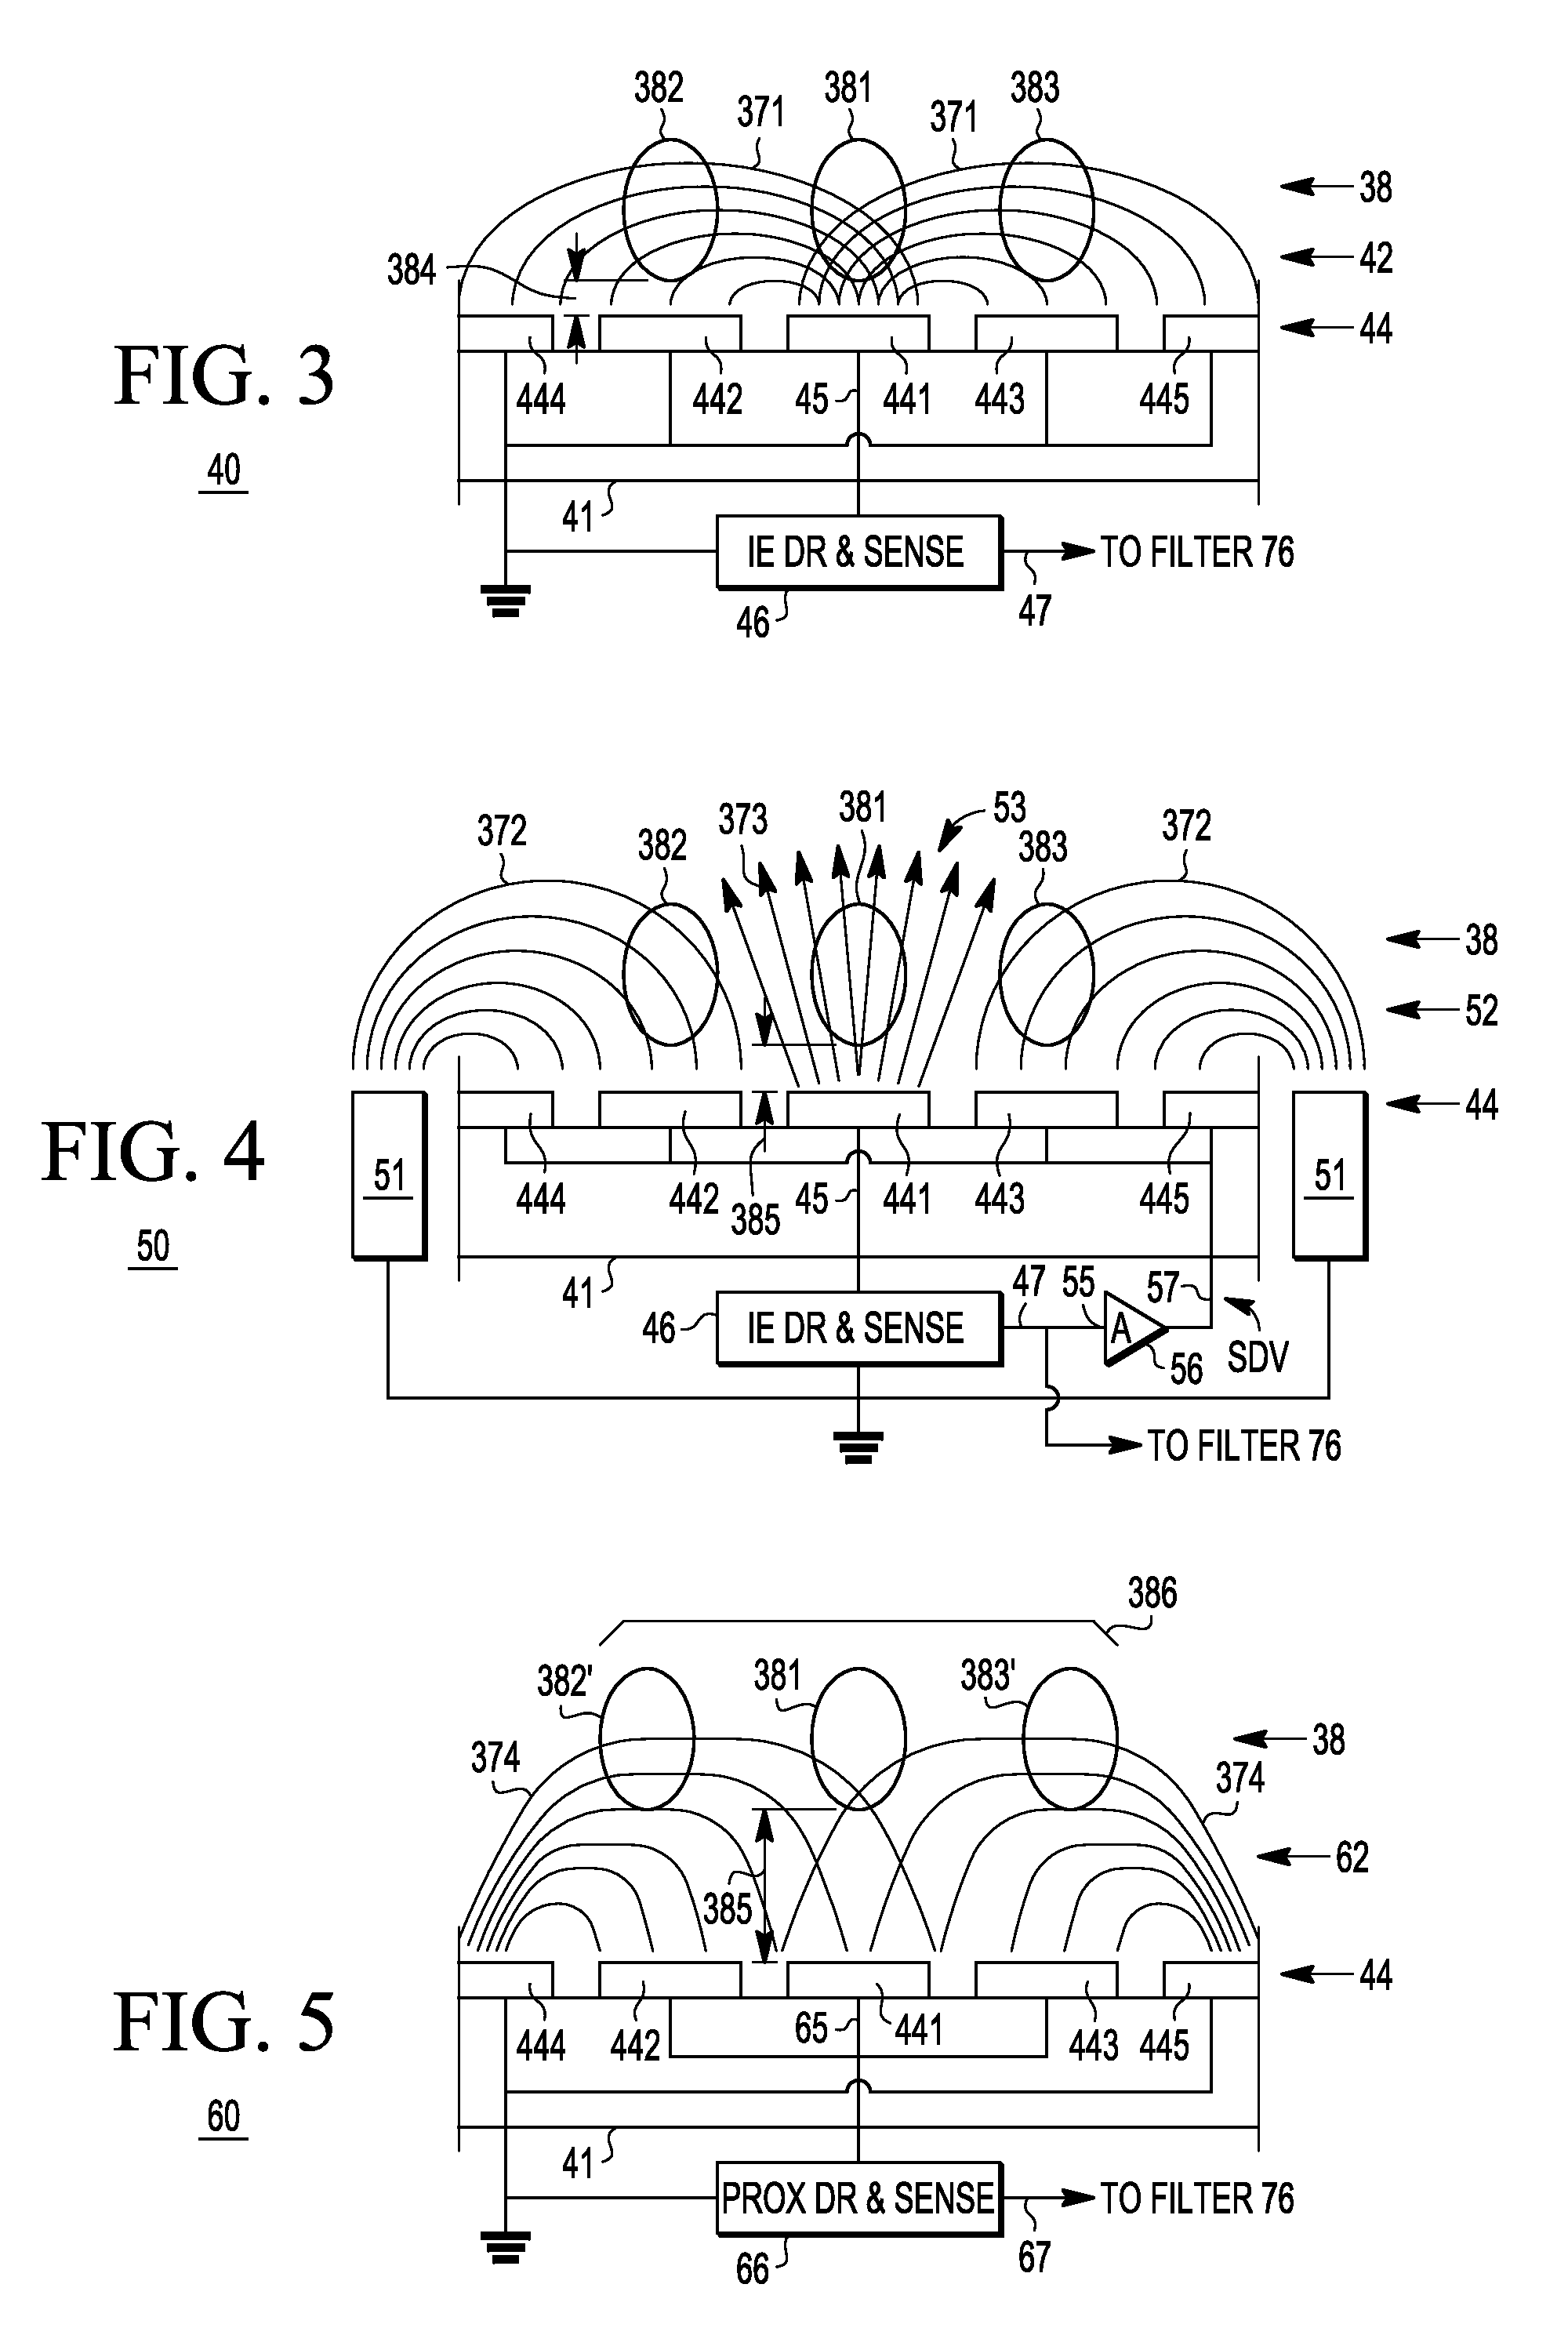 Device with proximity detection capability